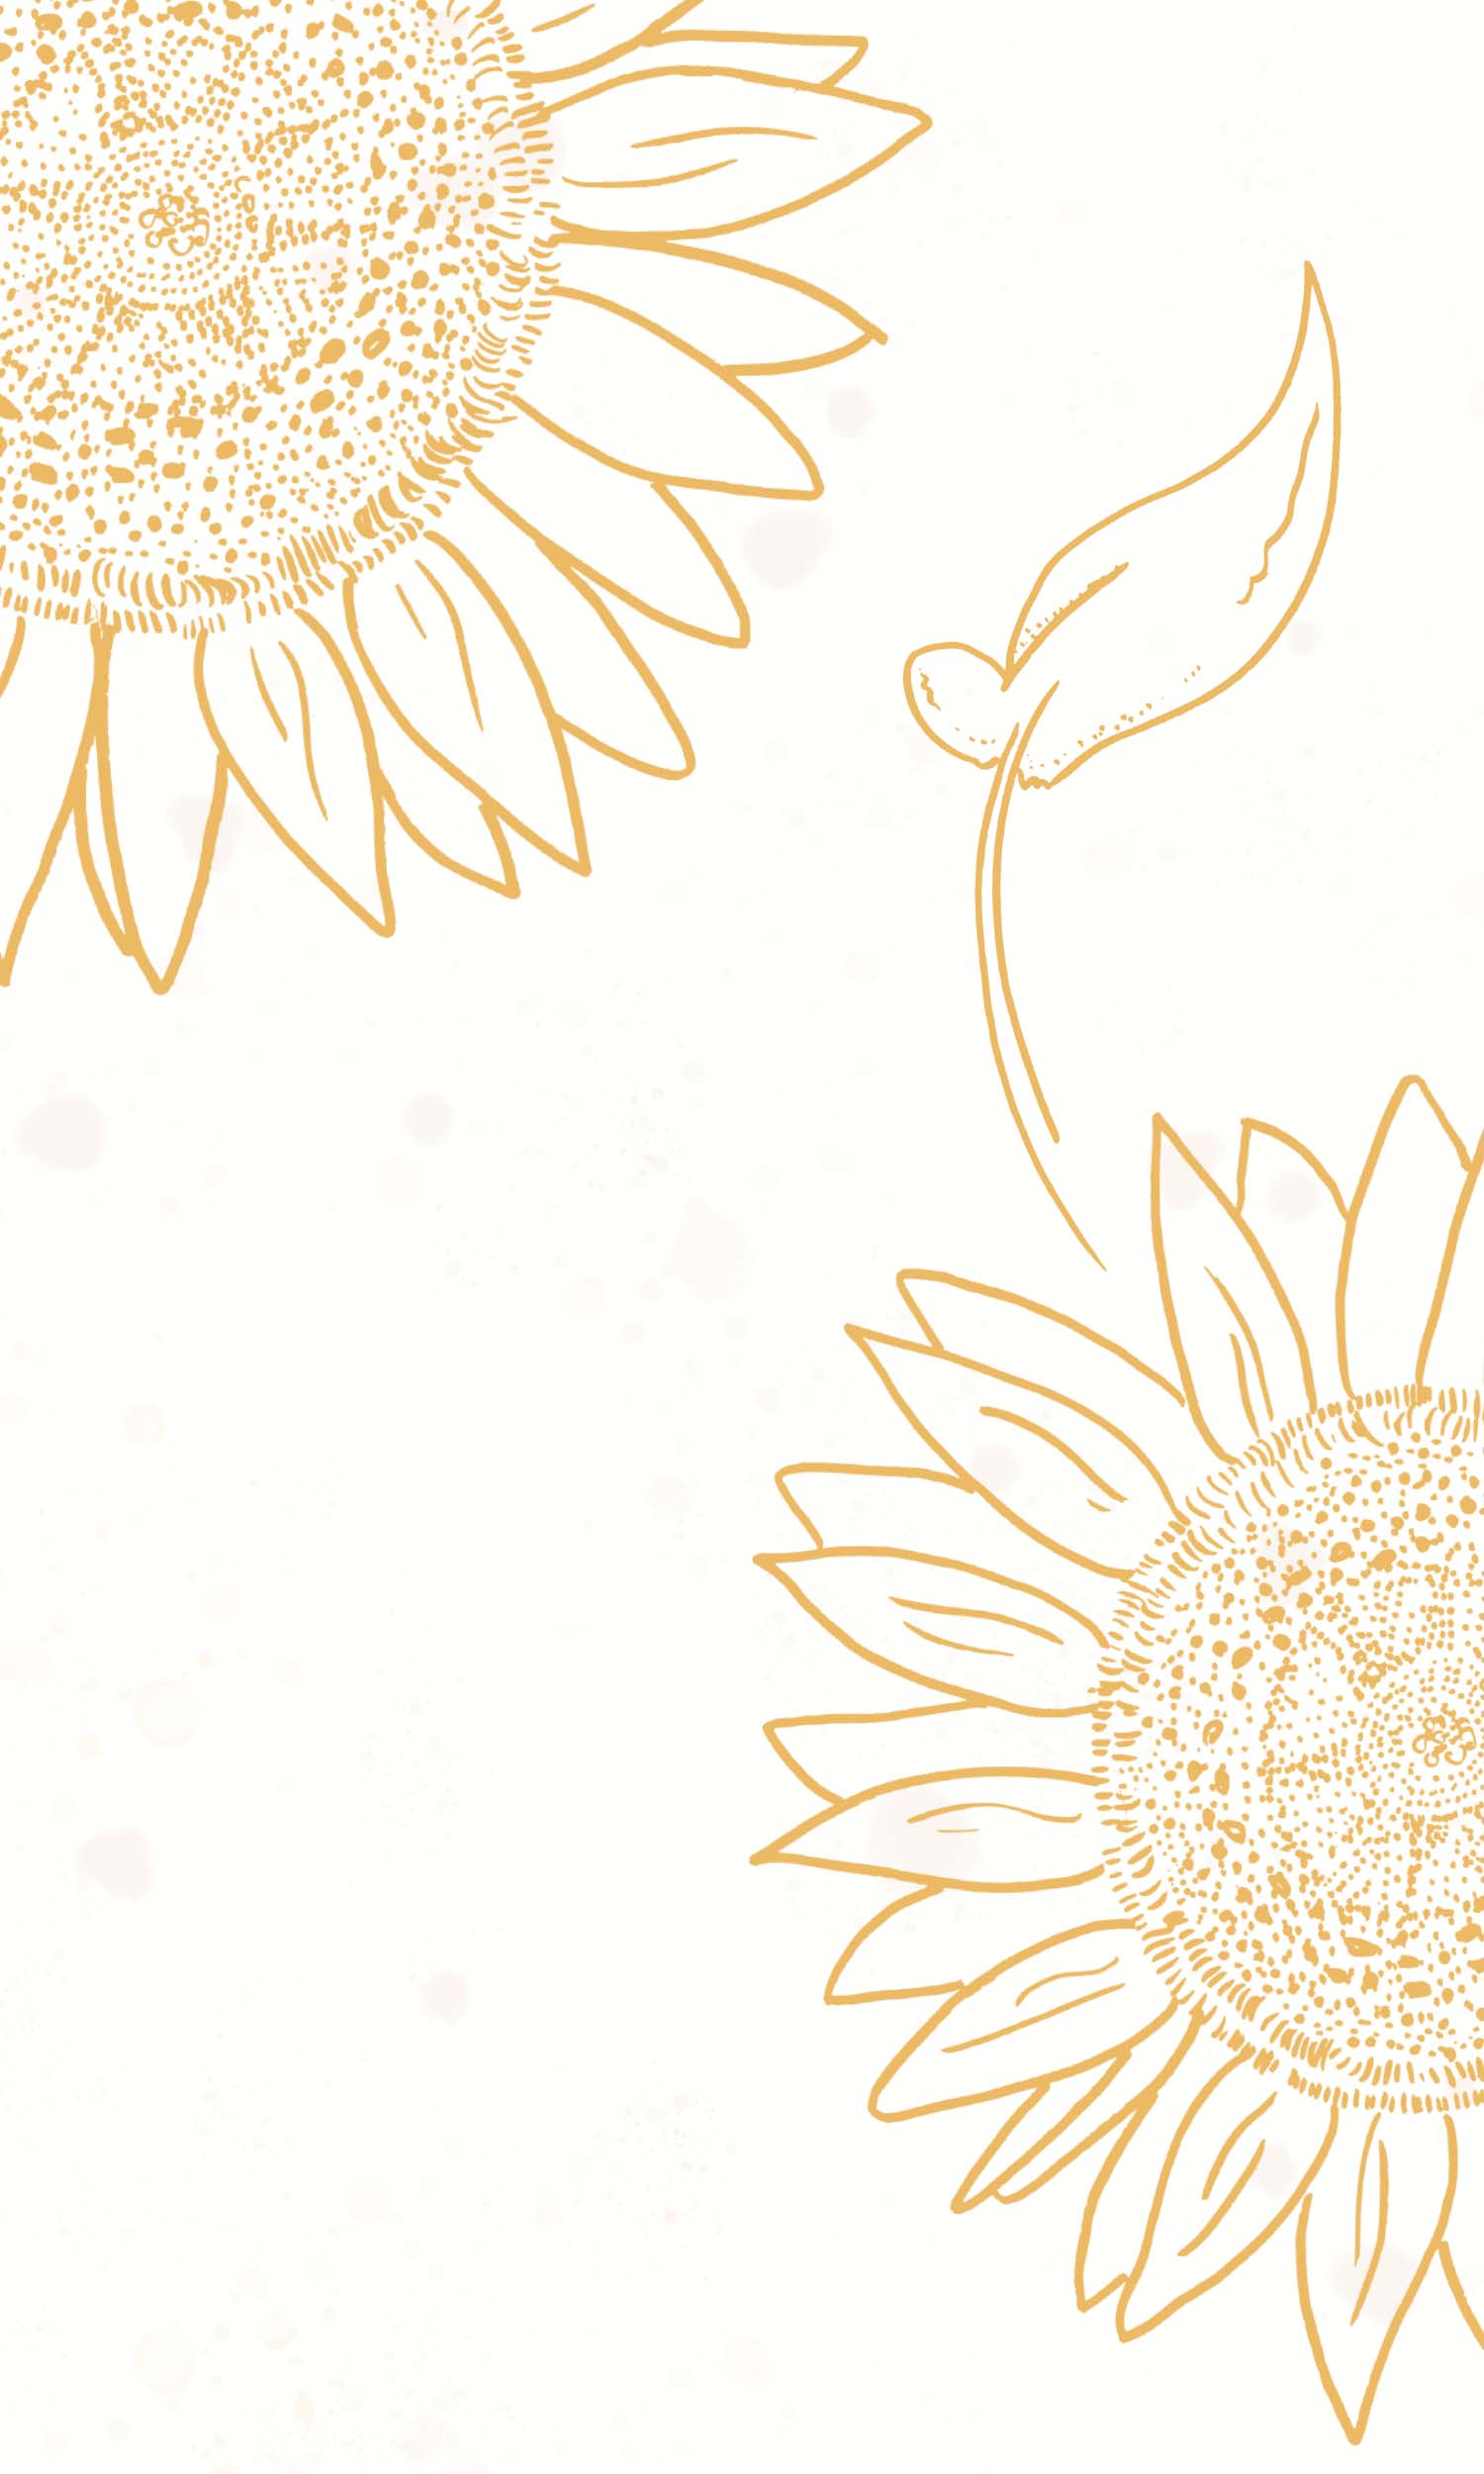 Gold sunflowers on a white background - Sunflower